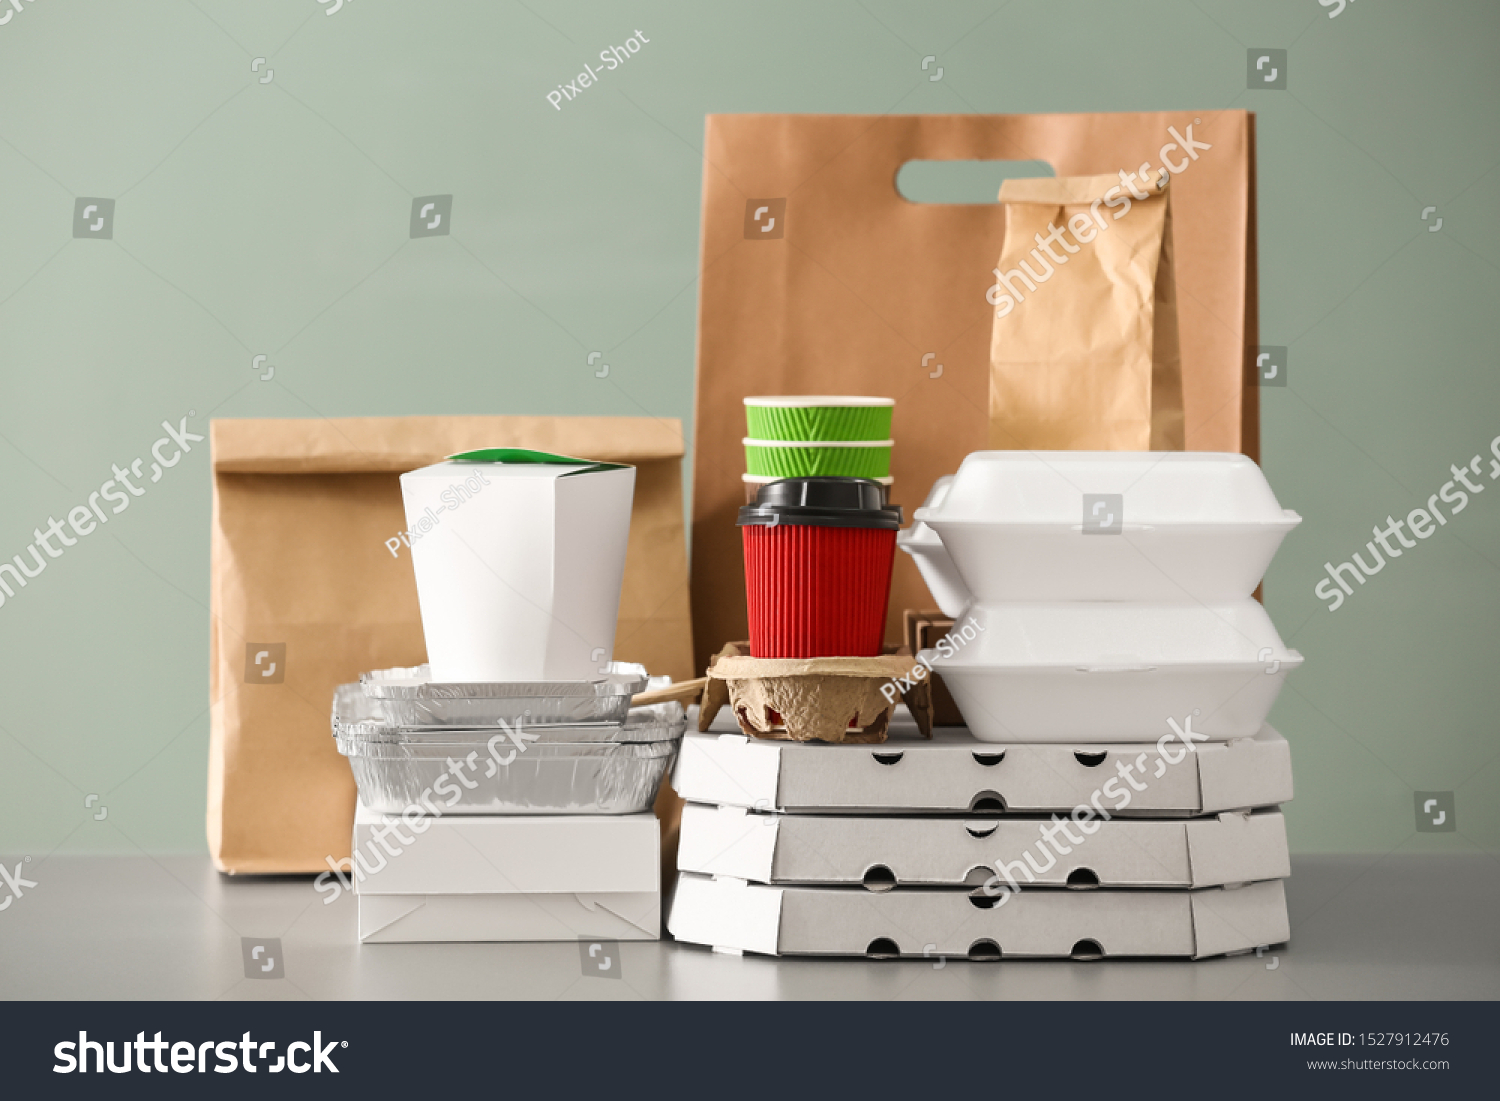 Different packages on table against color background. Food delivery service #1527912476